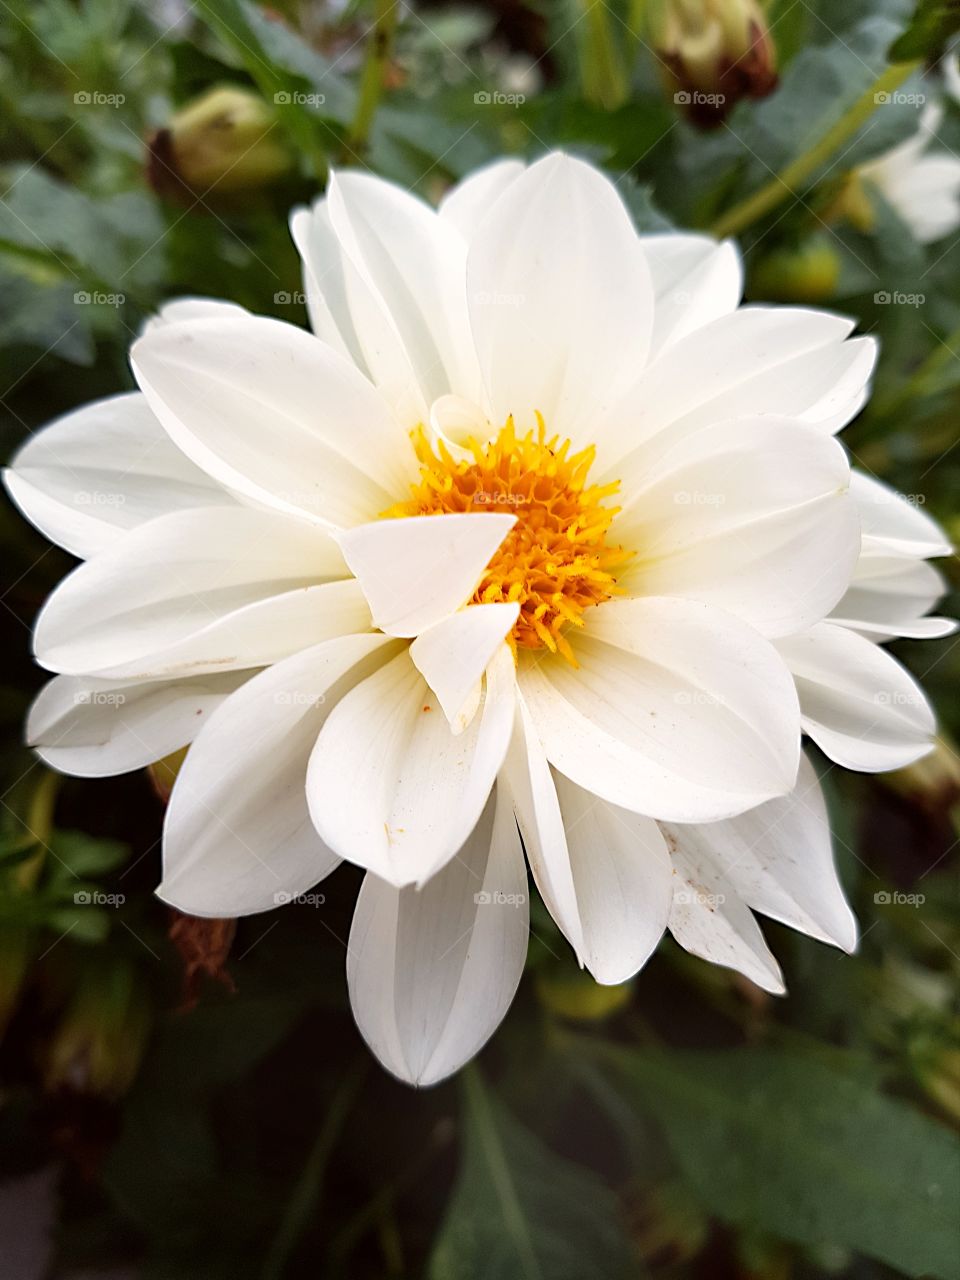 Beautiful white flower close-up in the garden